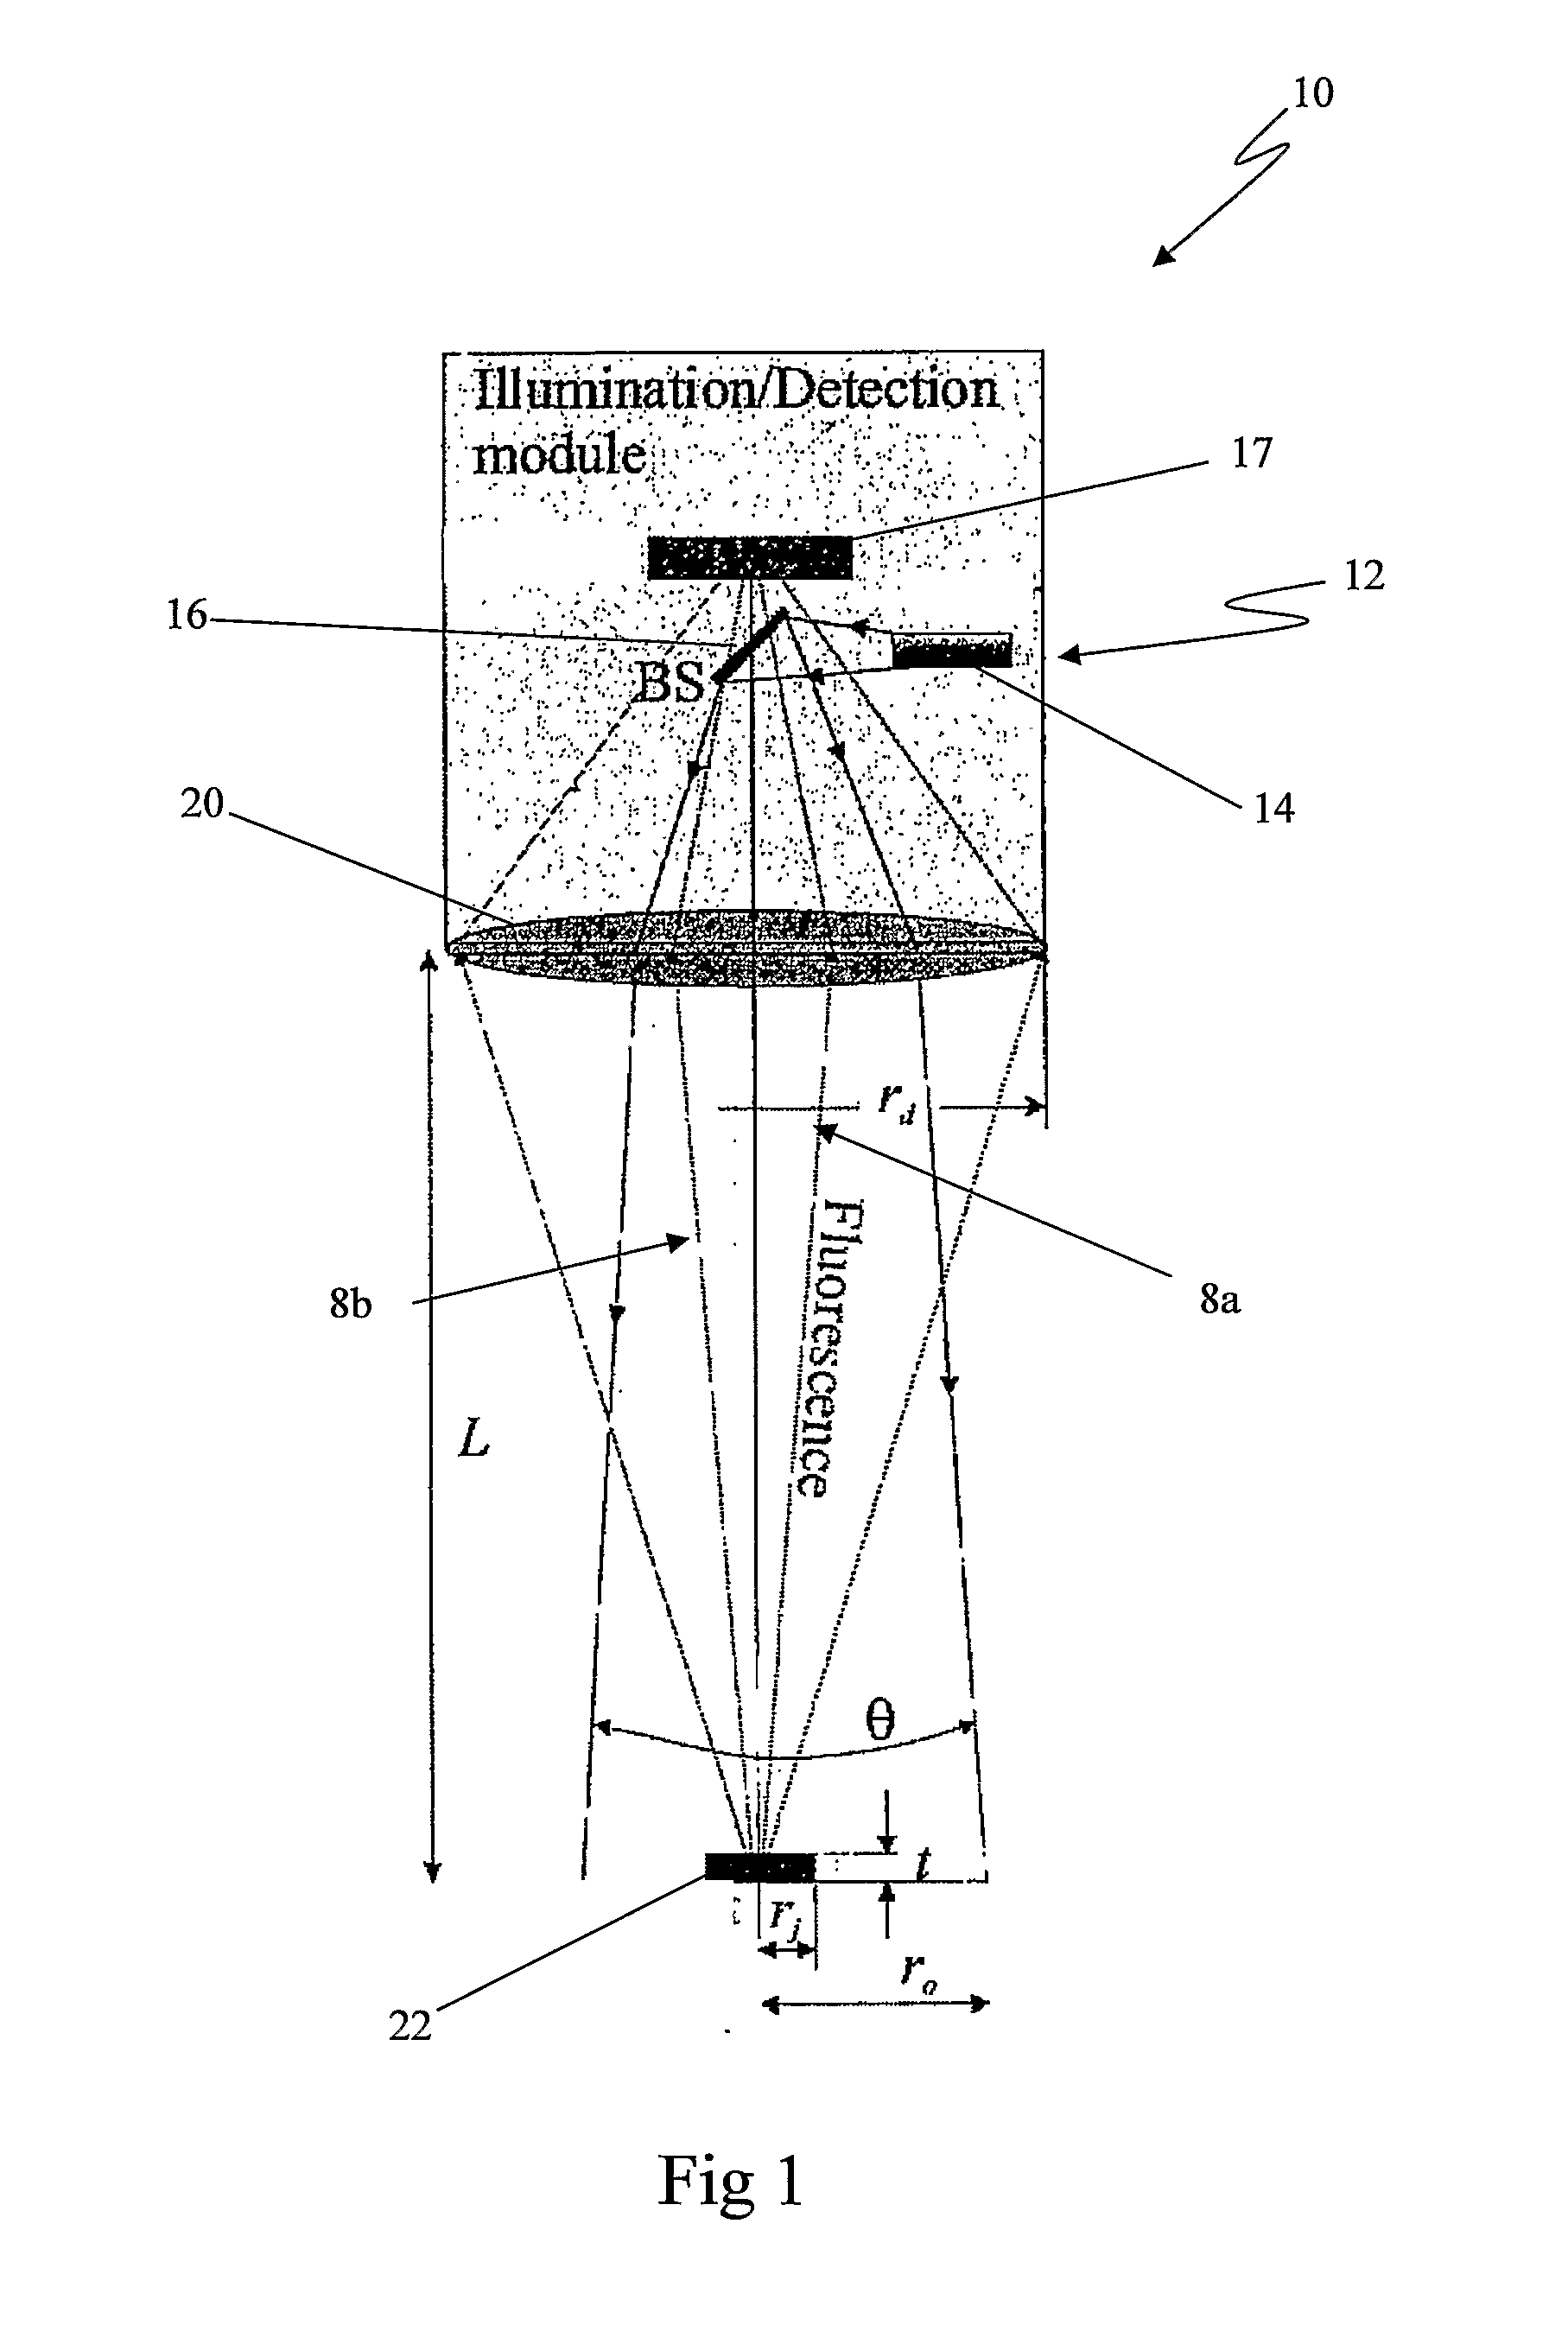 System and Method for Locating One or More Persons